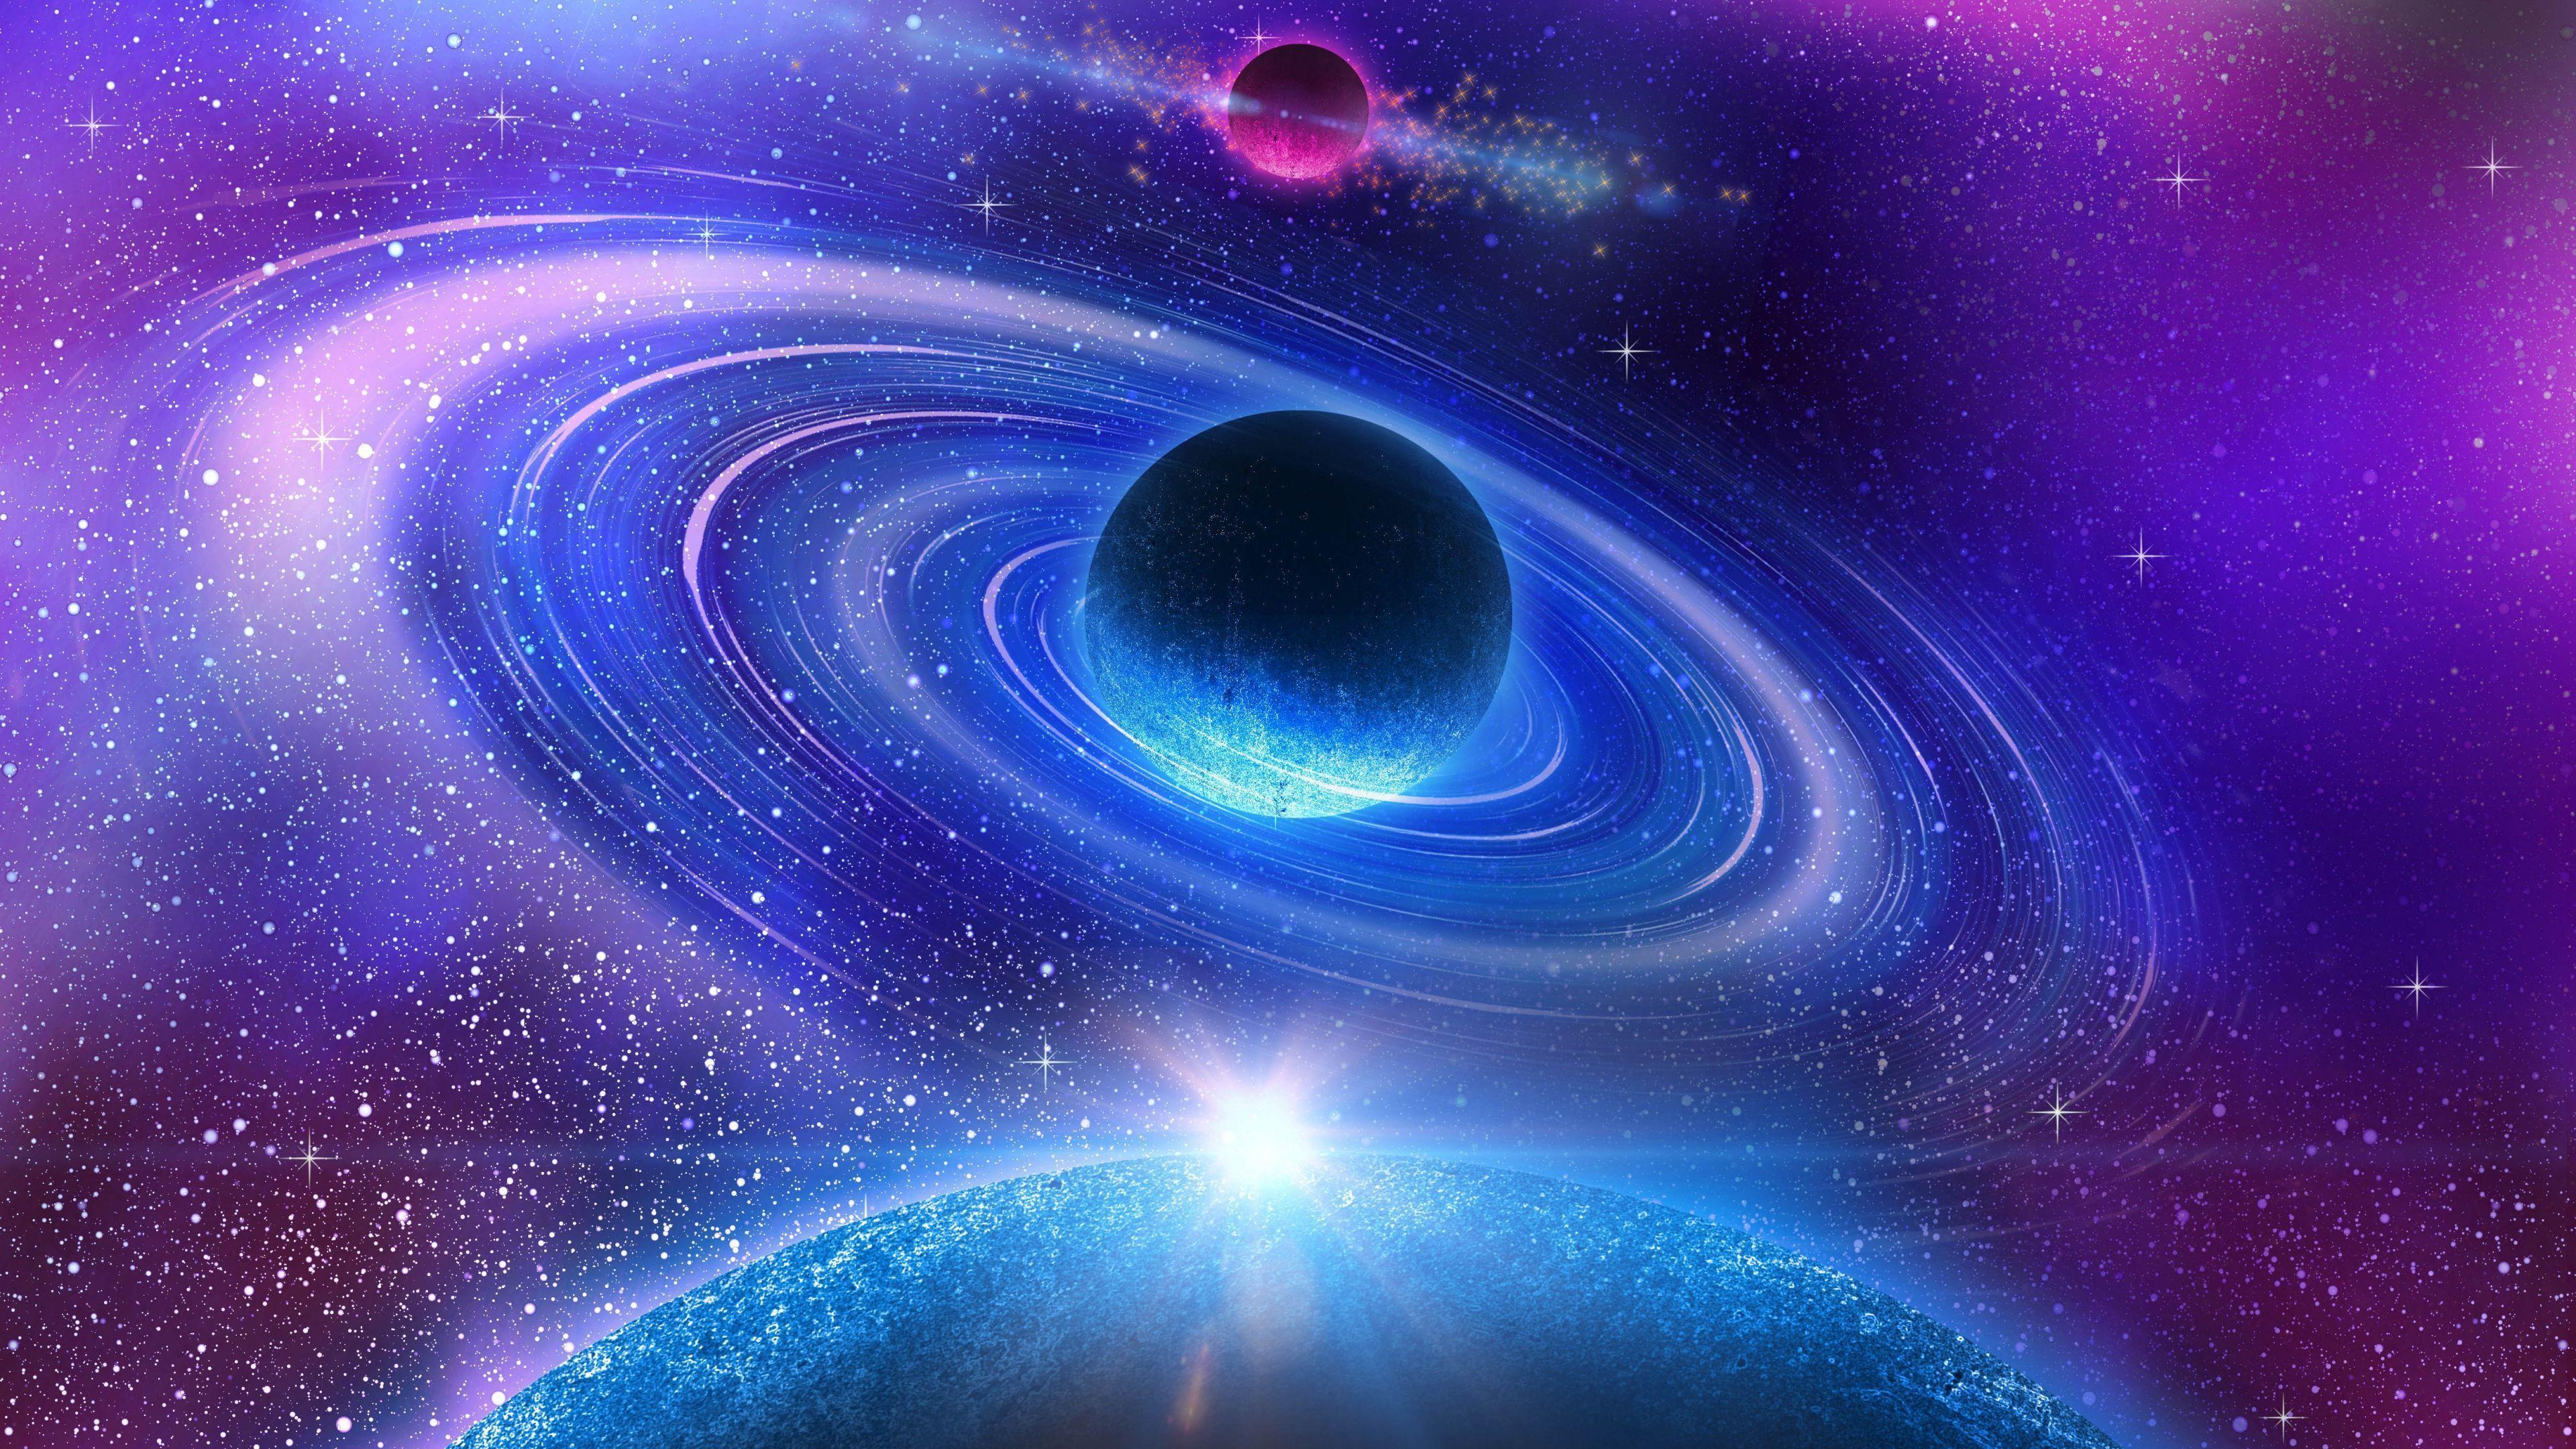 16k Ultra Hd Space Wallpapers Top Free 16k Ultra Hd Space Backgrounds Wallpaperaccess